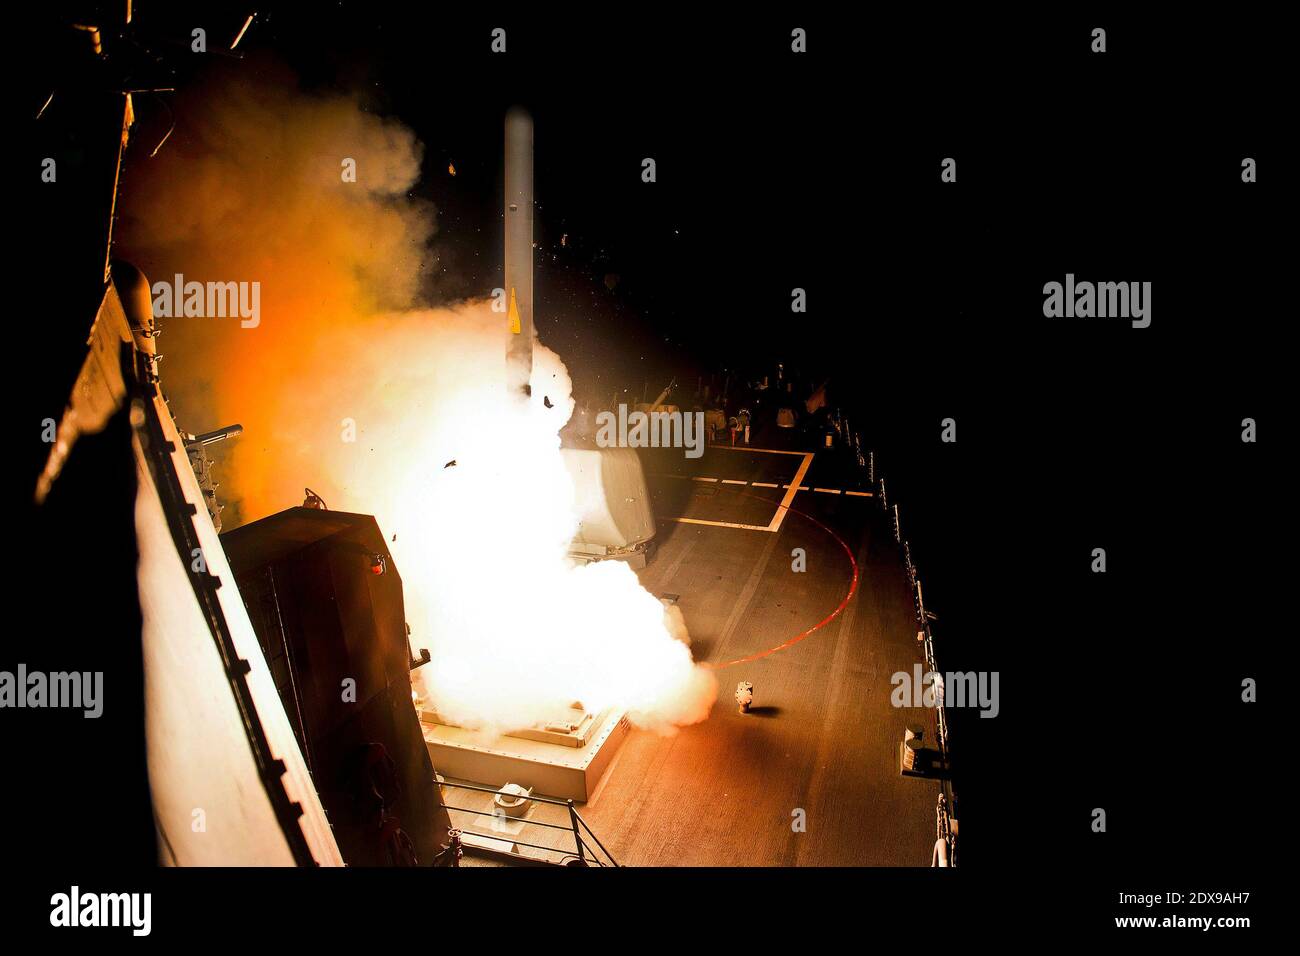 The guided-missile destroyer USS Arleigh Burke (DDG 51) launches Tomahawk cruise missiles. Arleigh Burke is deployed in the U.S. 5th Fleet area of responsibility supporting maritime security operations and theater security cooperation efforts. Red Sea, September 23, 2014. Photo by US Navy via ABACAPRESS.COM Stock Photo